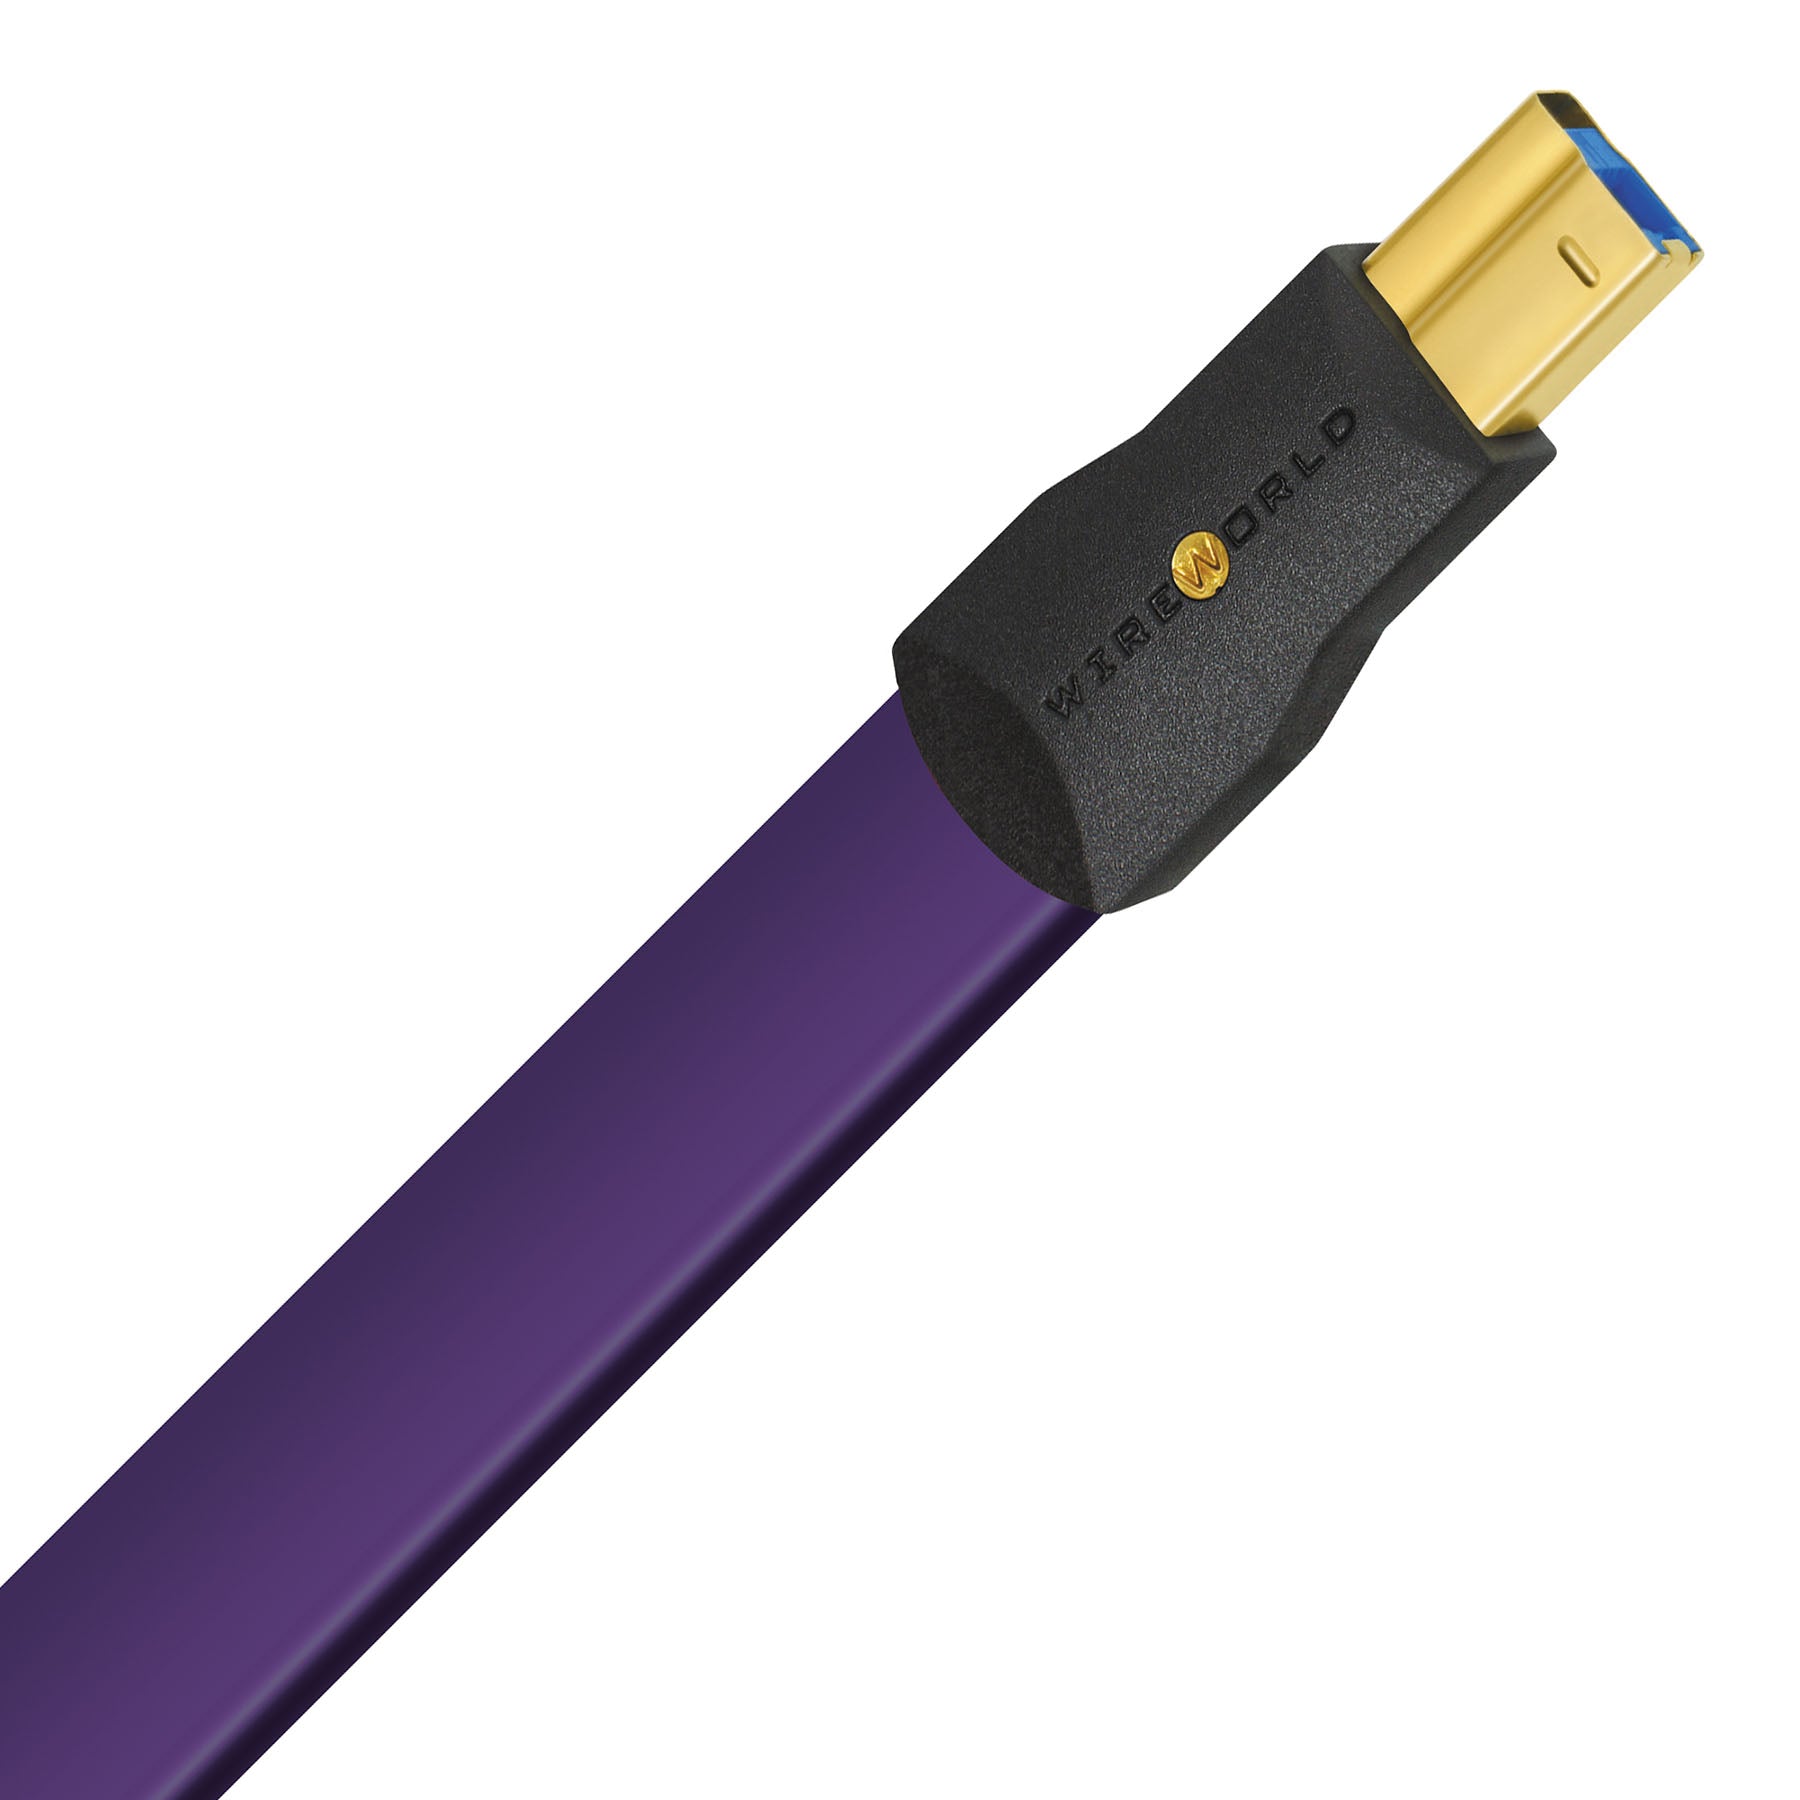 Wireworld Ultraviolet™ 8 USB 3.0 Audio Cables